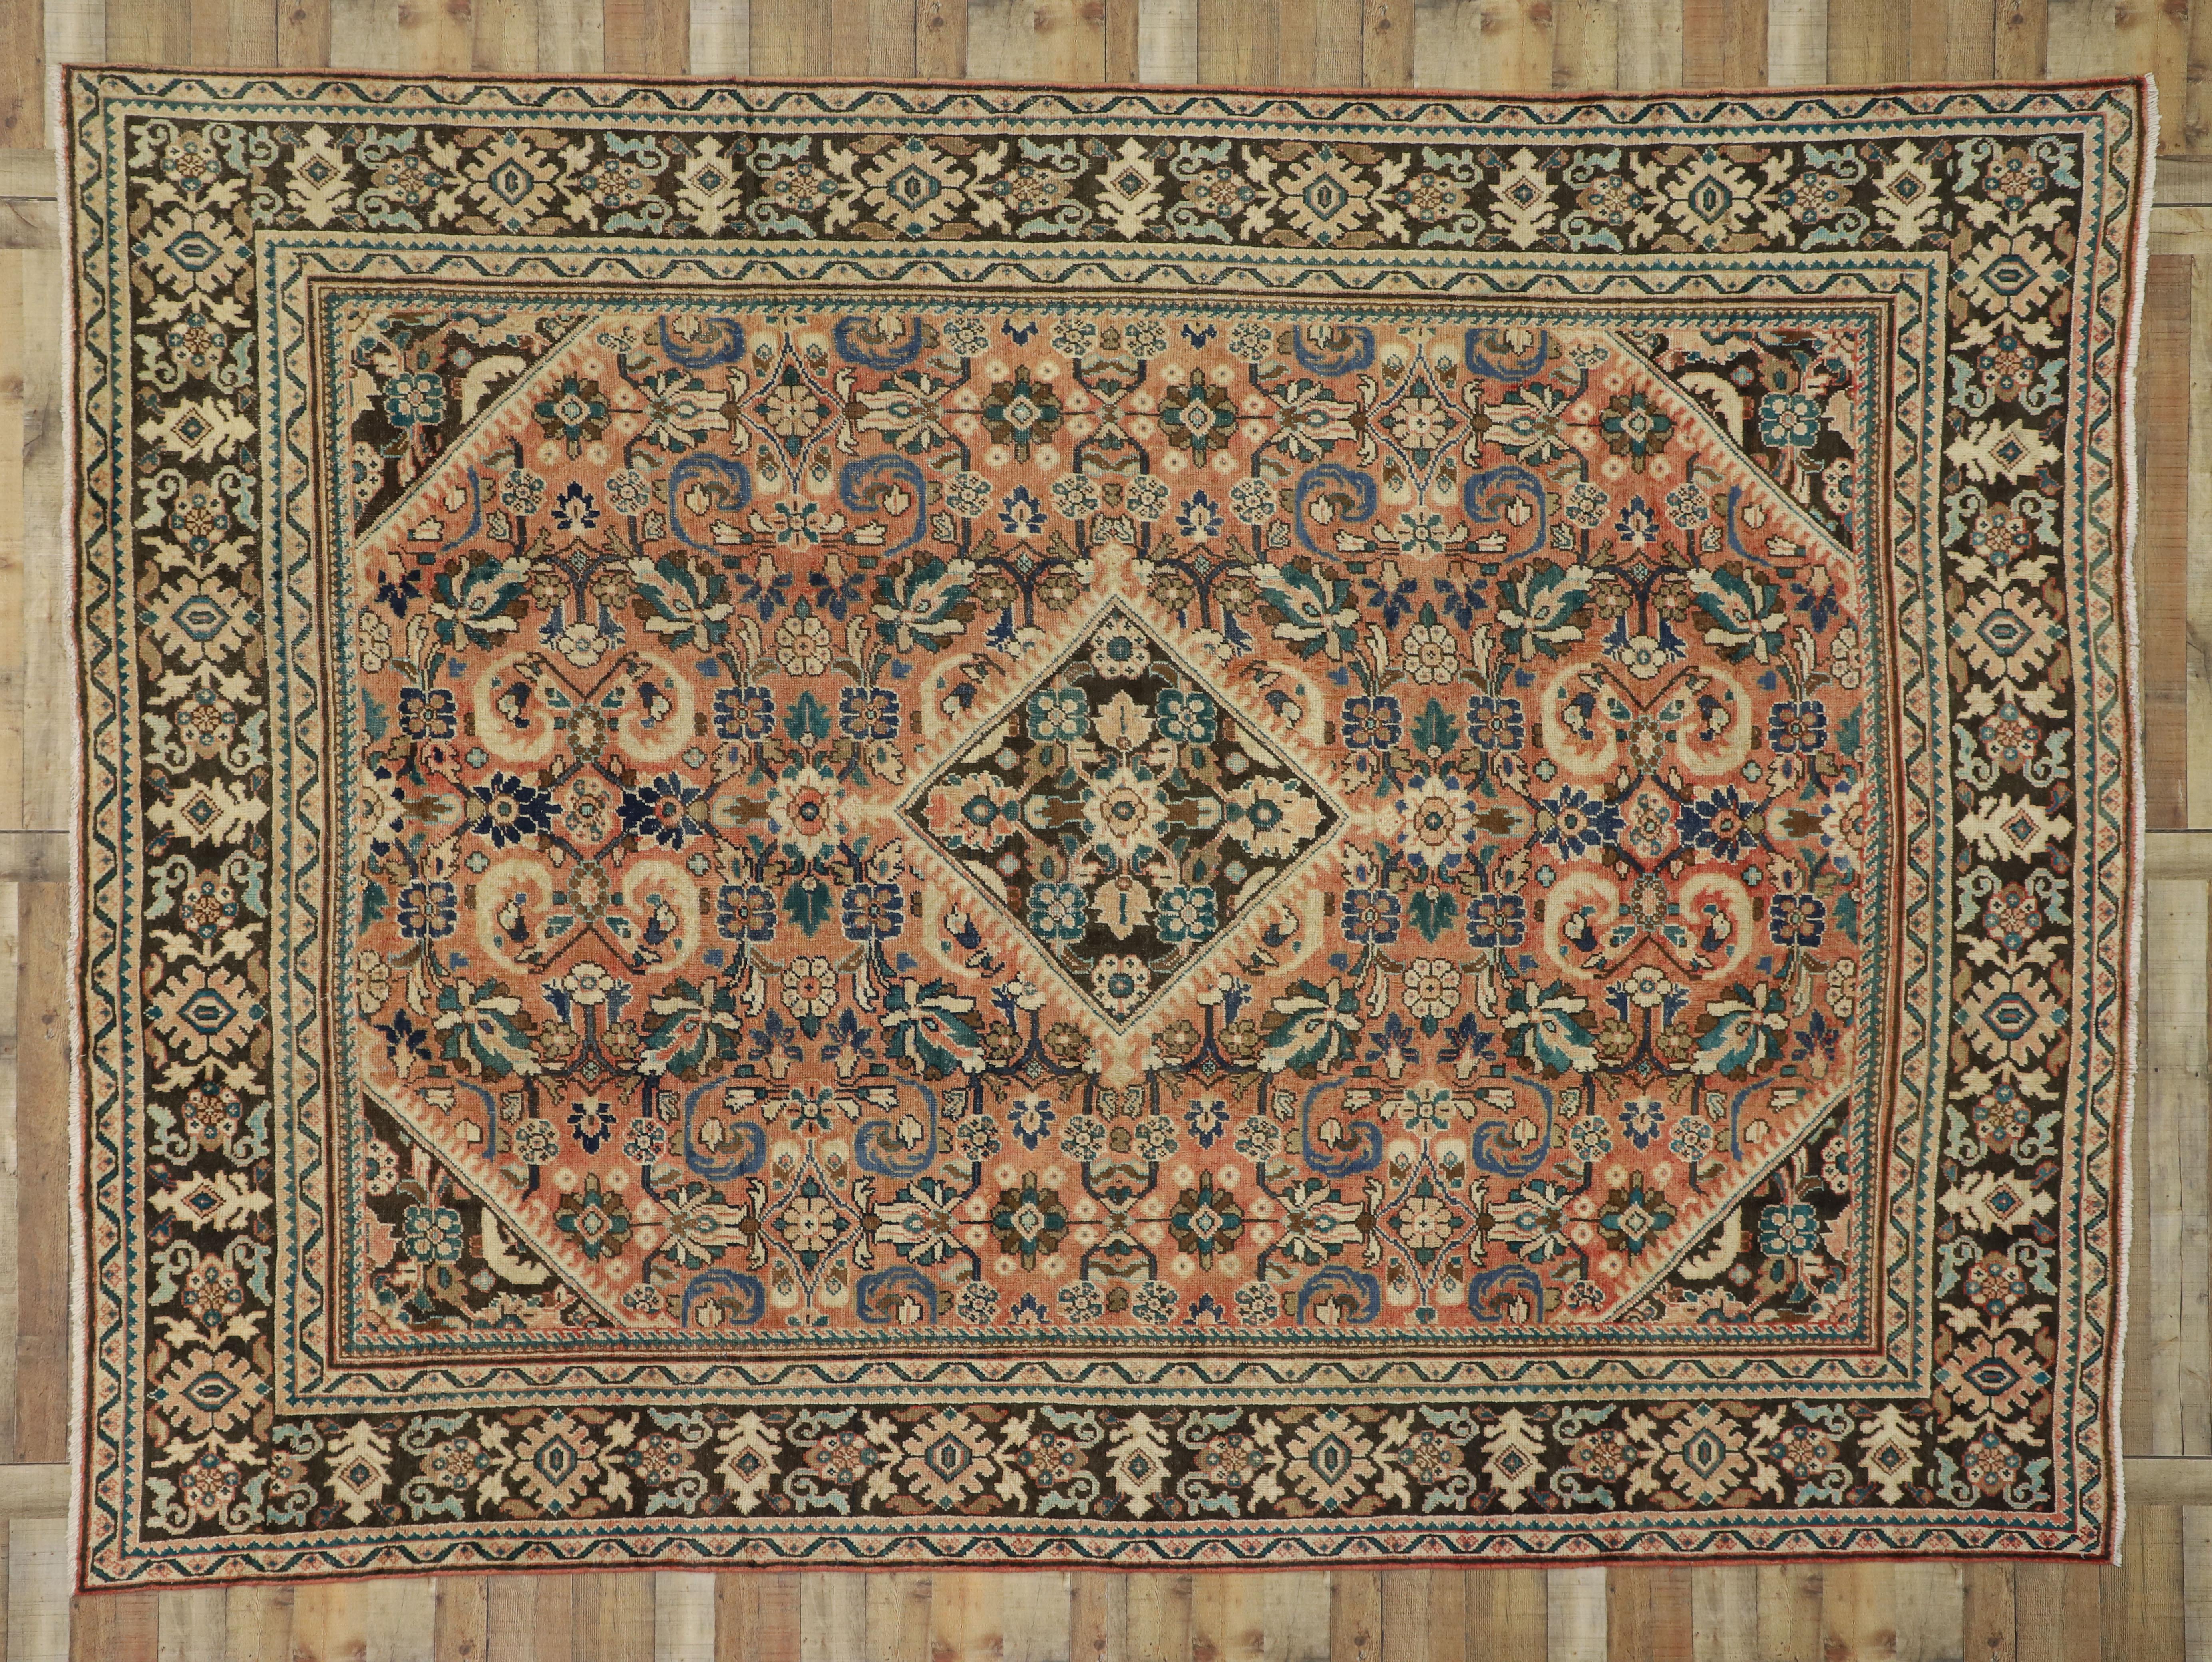 Antique Persian Mahal Rug with Arts & Crafts Style 1